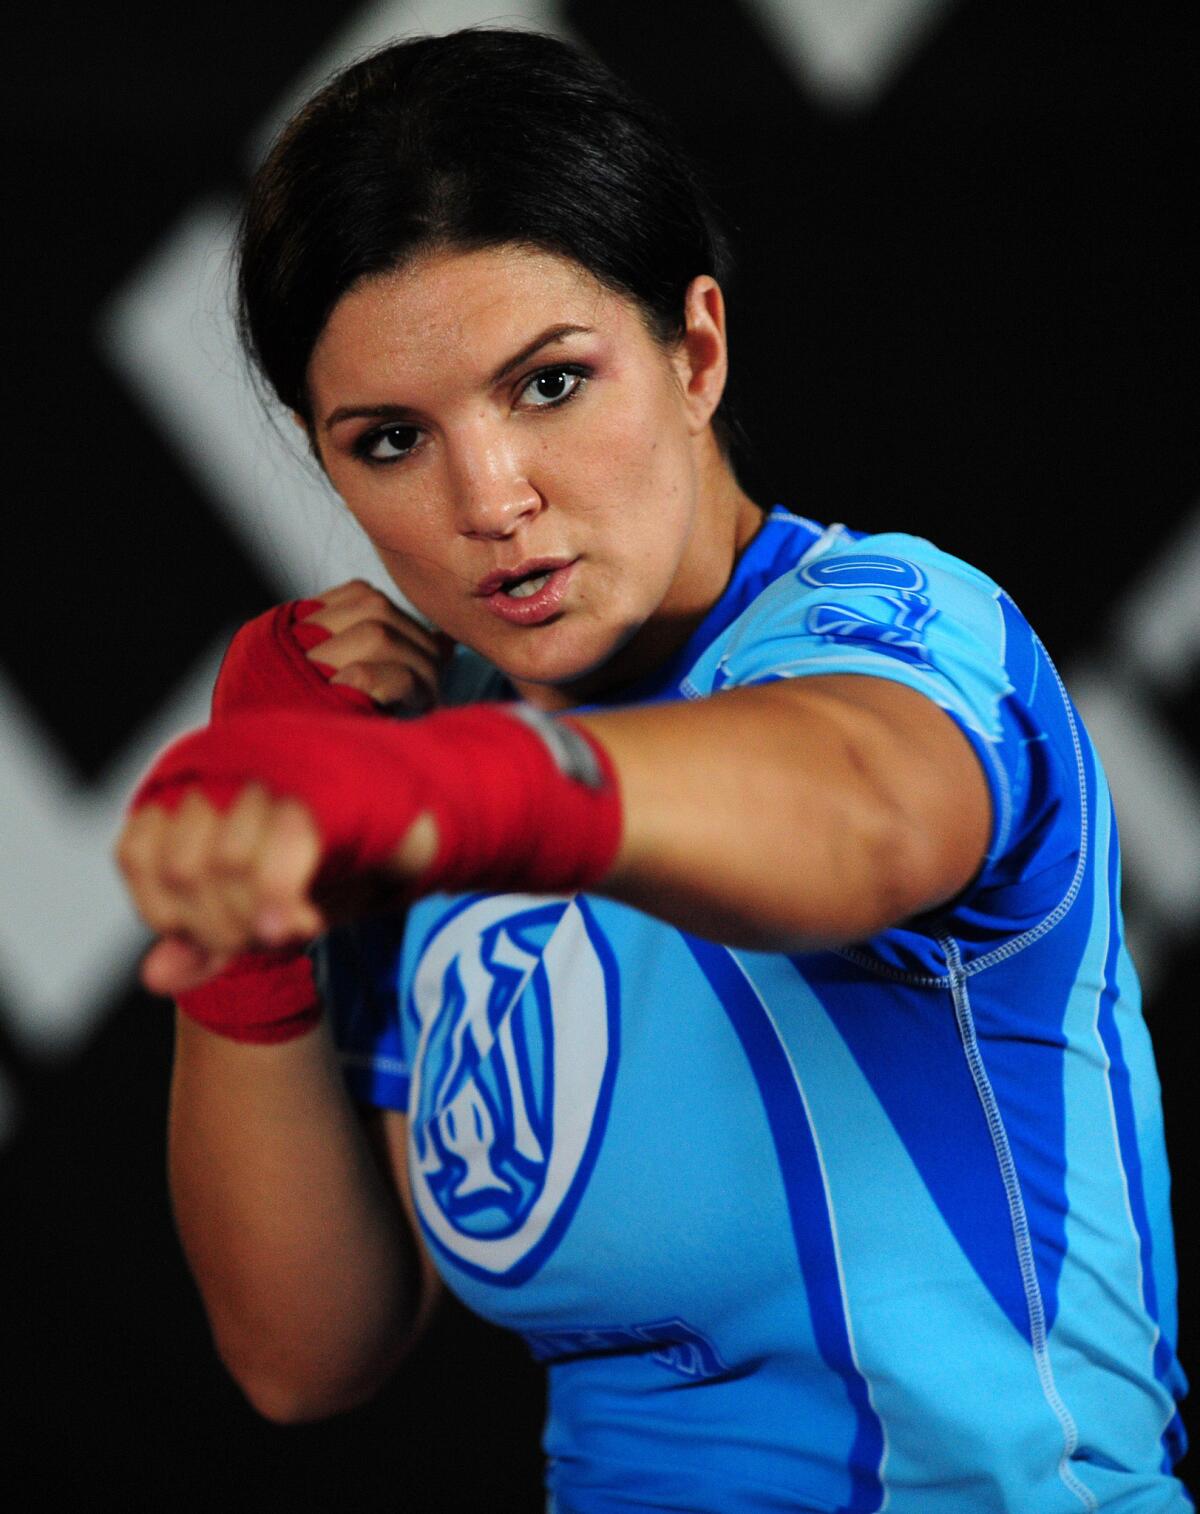 MMA fans await Gina Carano's return to the ring.